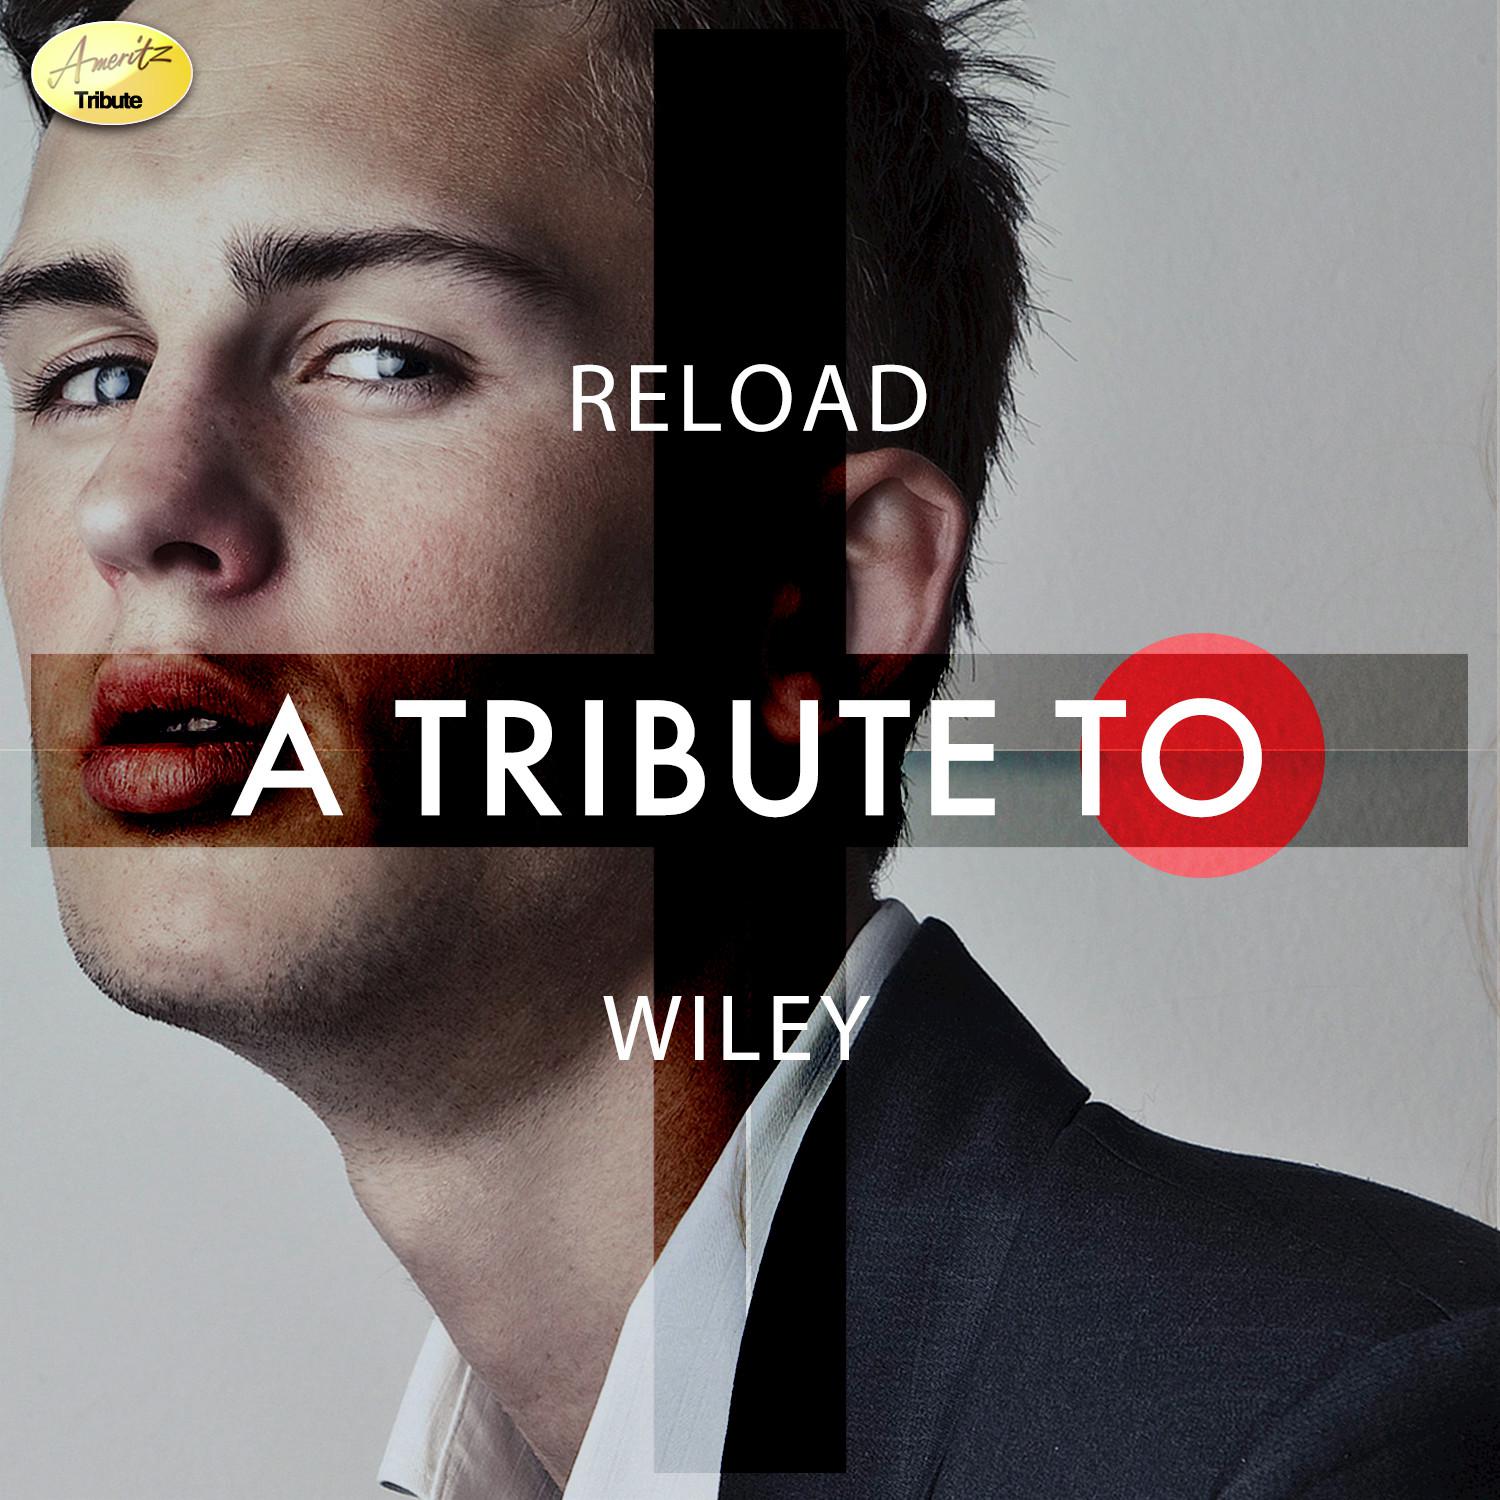 Reload - A Tribute to Wiley